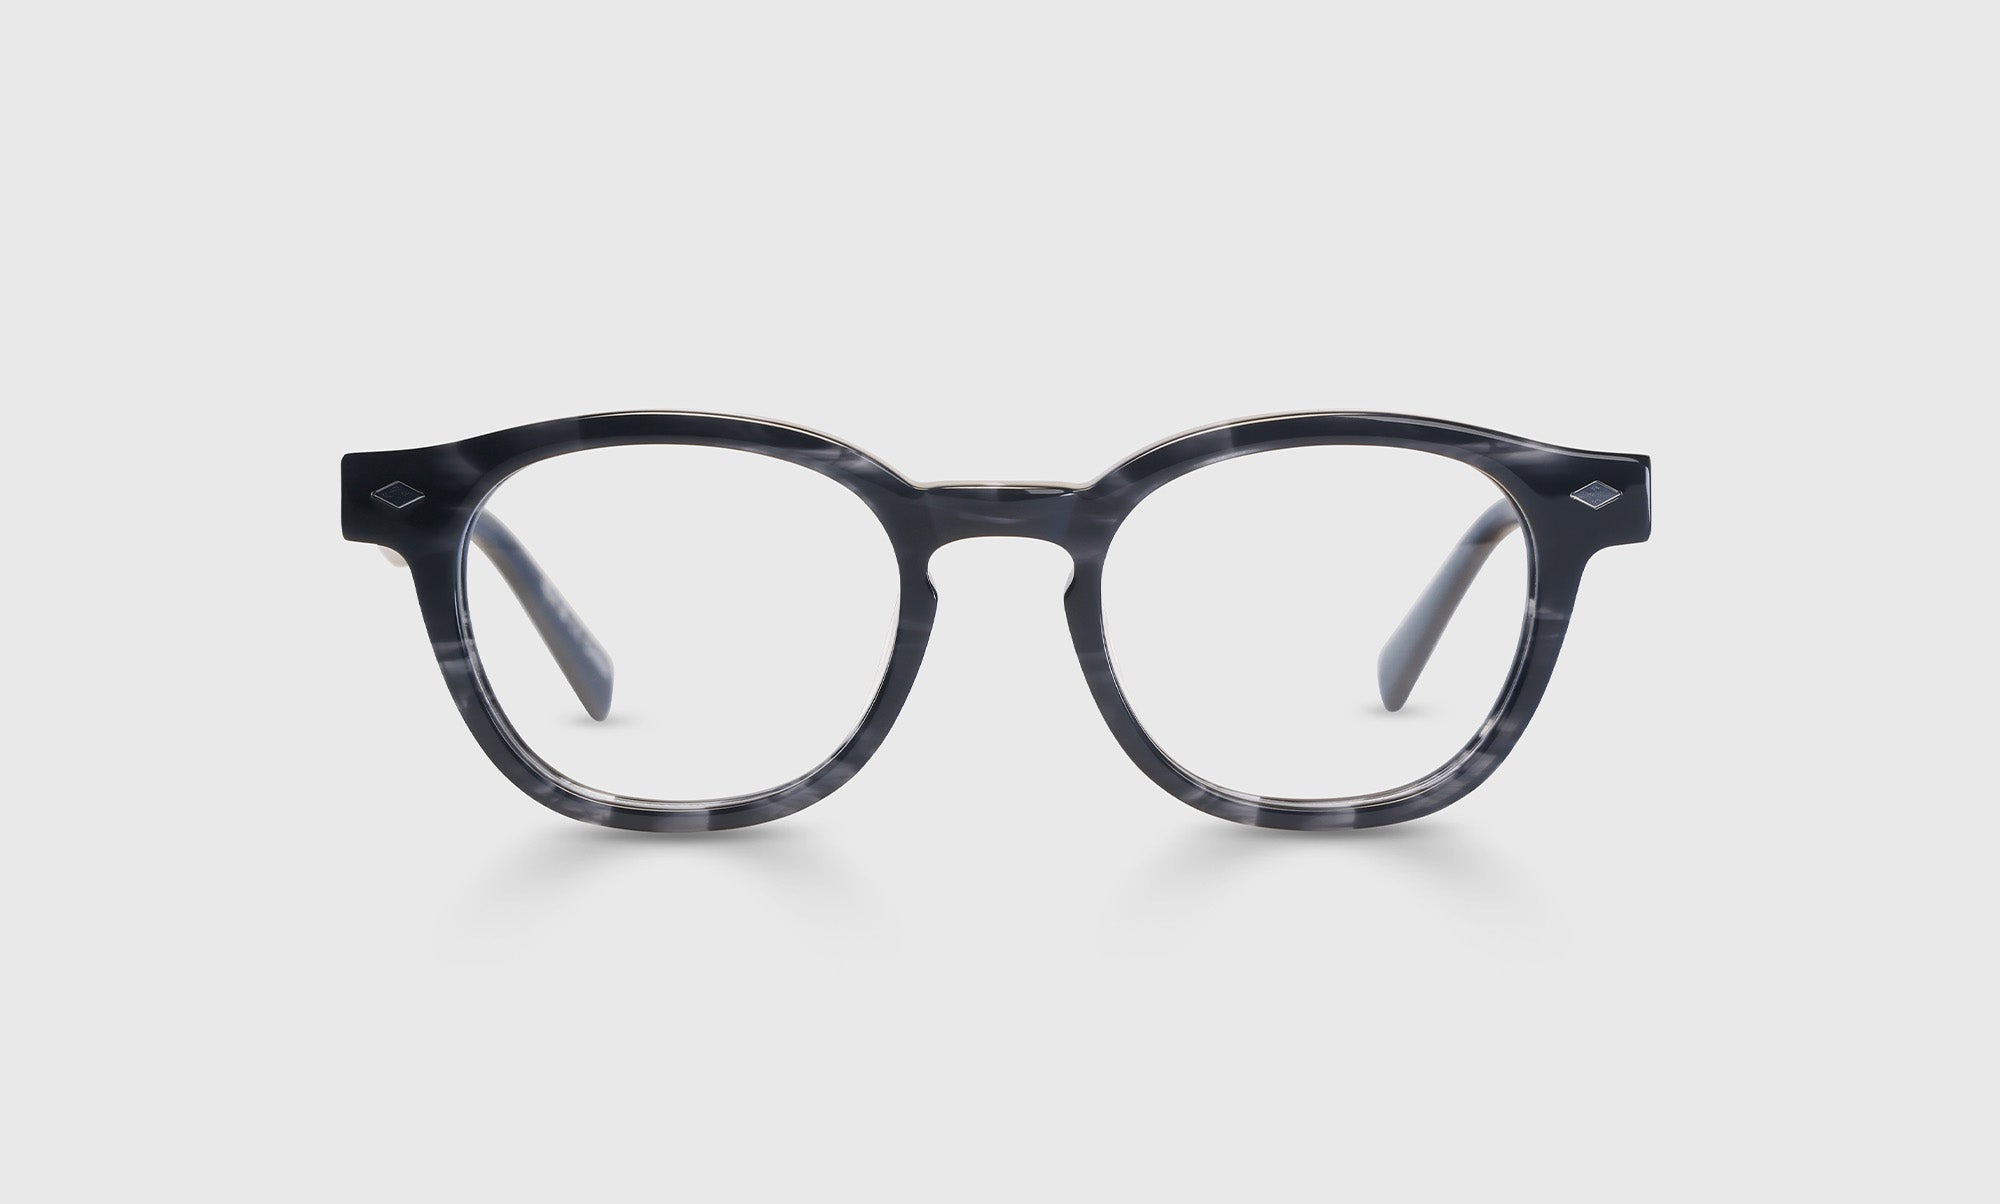 00 | eyebobs Bitty Witty, Narrow, Round, Readers, Blue Light, Prescription Glasses, Front